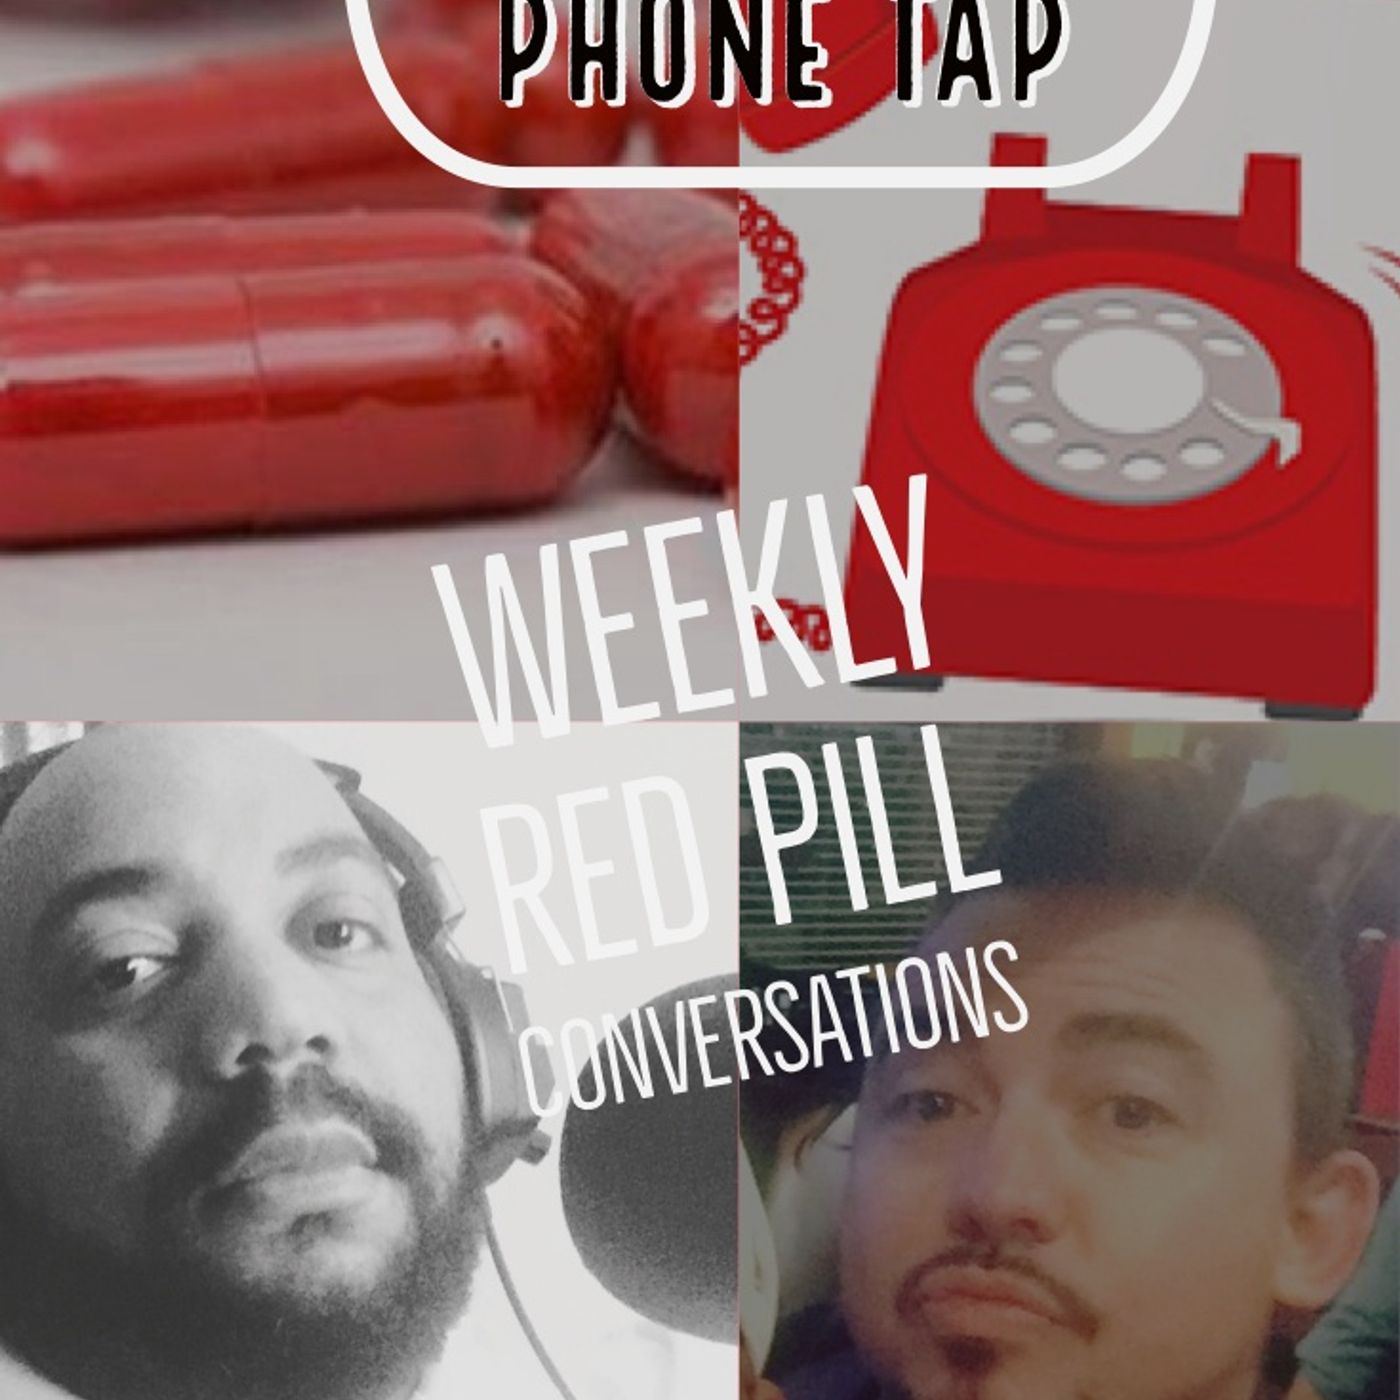 When it's hard to compare yourself to others, you're on the right track - The Red Pill Phone Tap #46